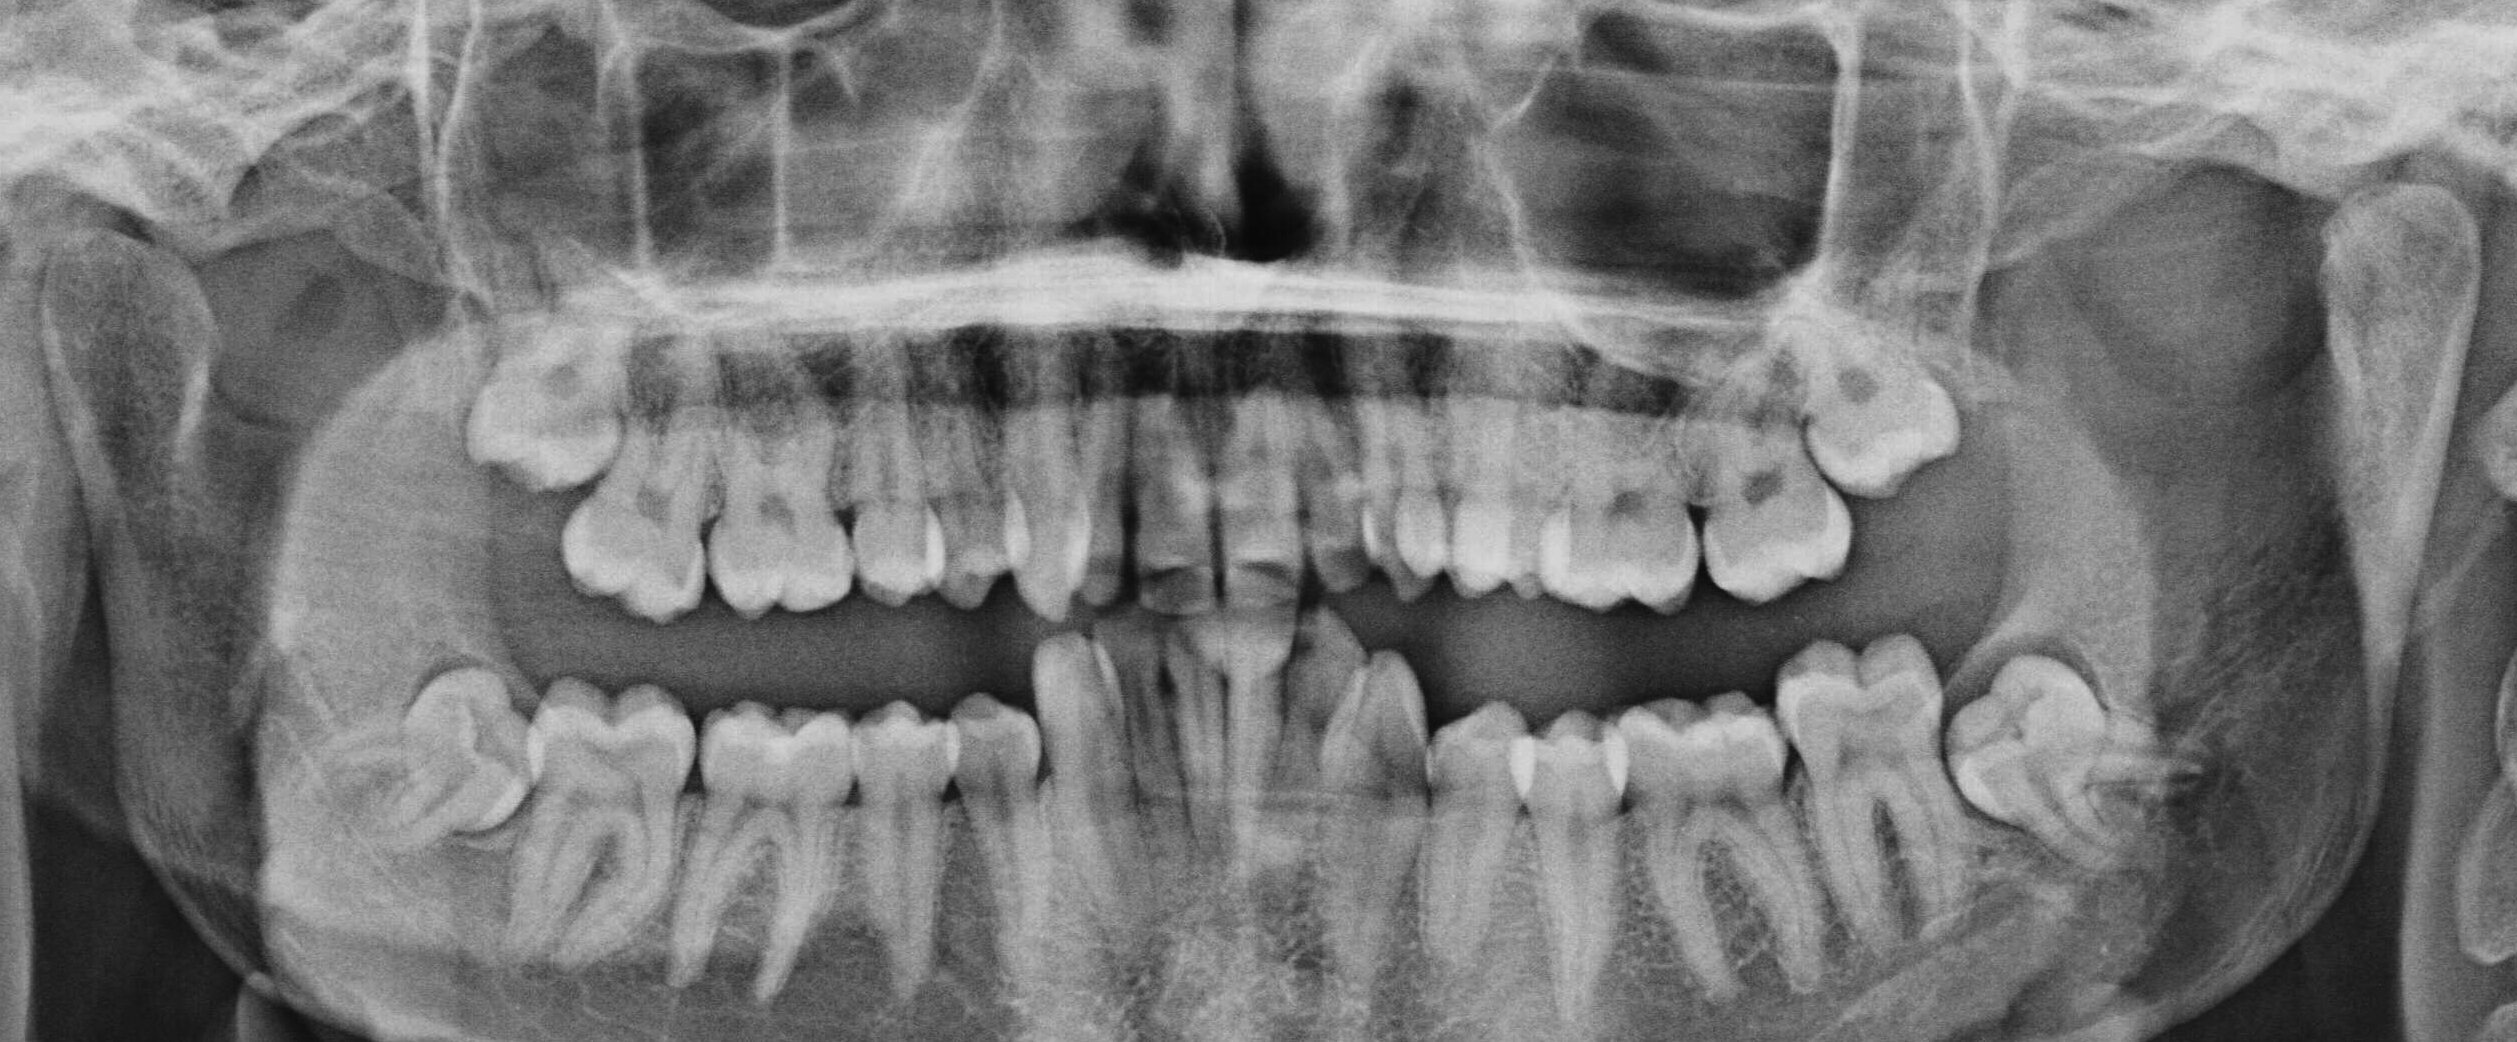 pain during wisdom tooth eruption